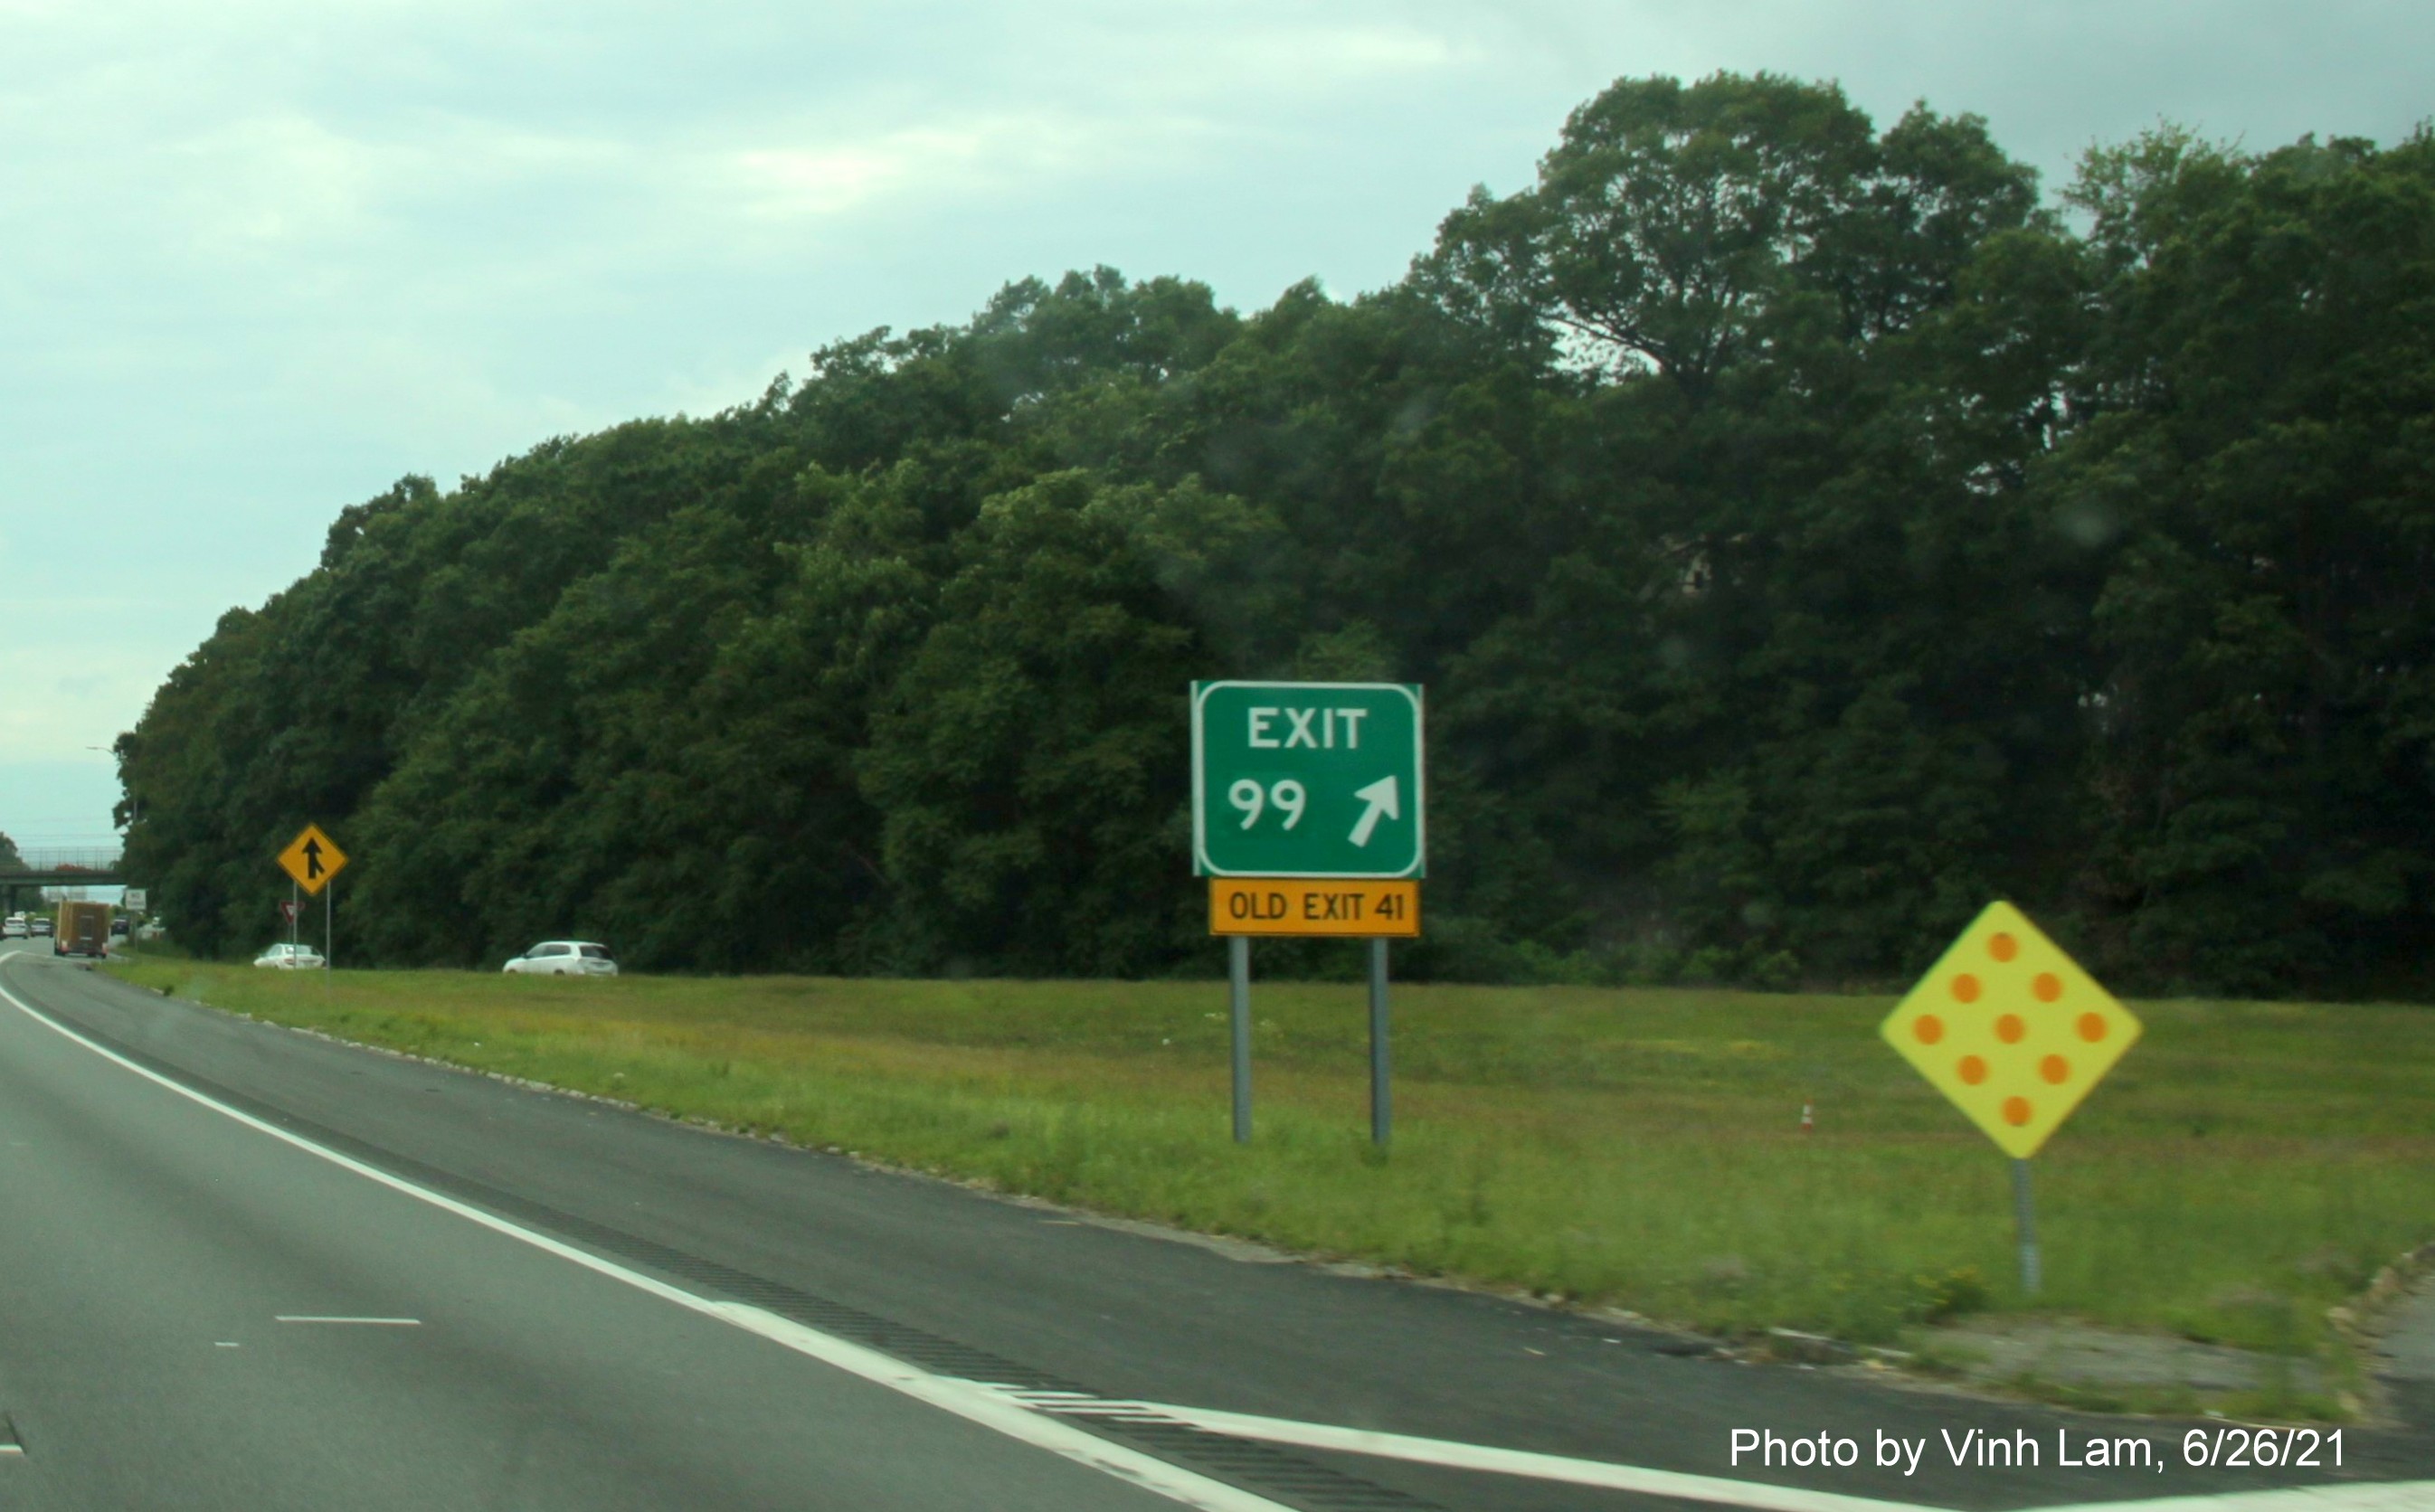 Image of gore sign for MA 28 exit with new milepost based exit number and yellow Old Exit 41 sign attached below on I-495 South in Andover, by Vinh Lam, June 2021